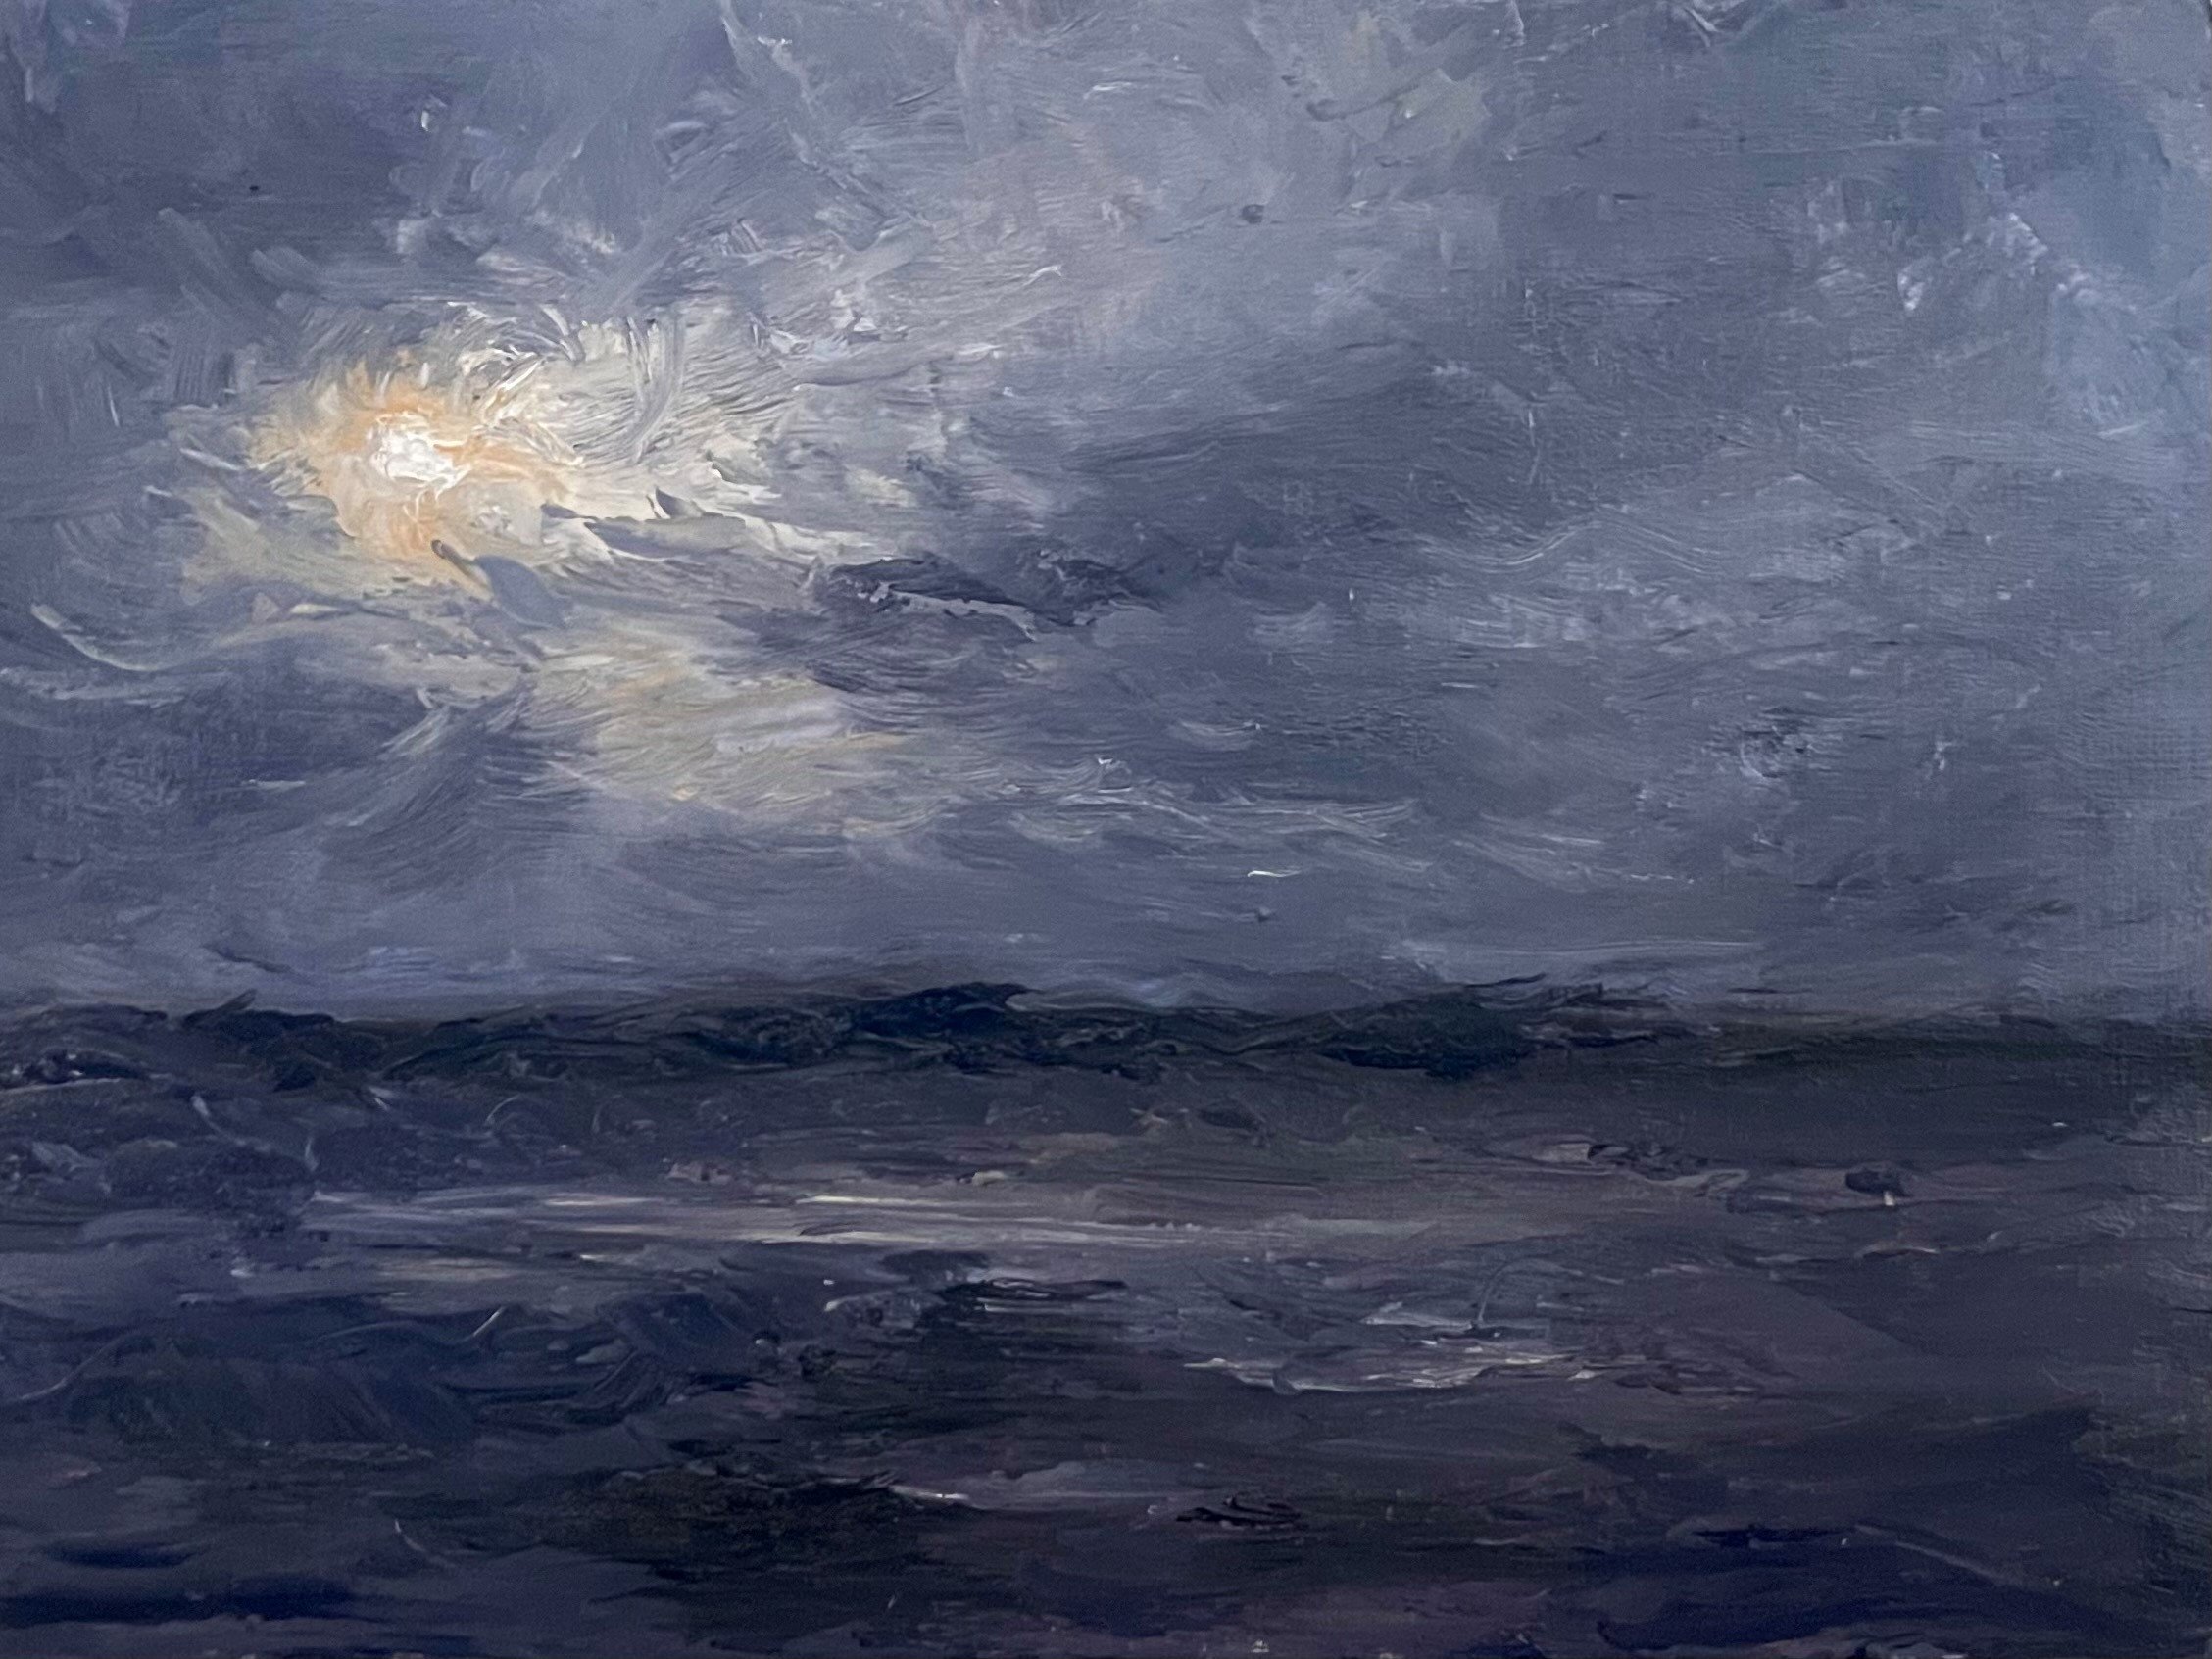 21-02-26  Experiment with Night Marsh Moon   Oil on Gesso Paper    9 x 12 inches  .jpg